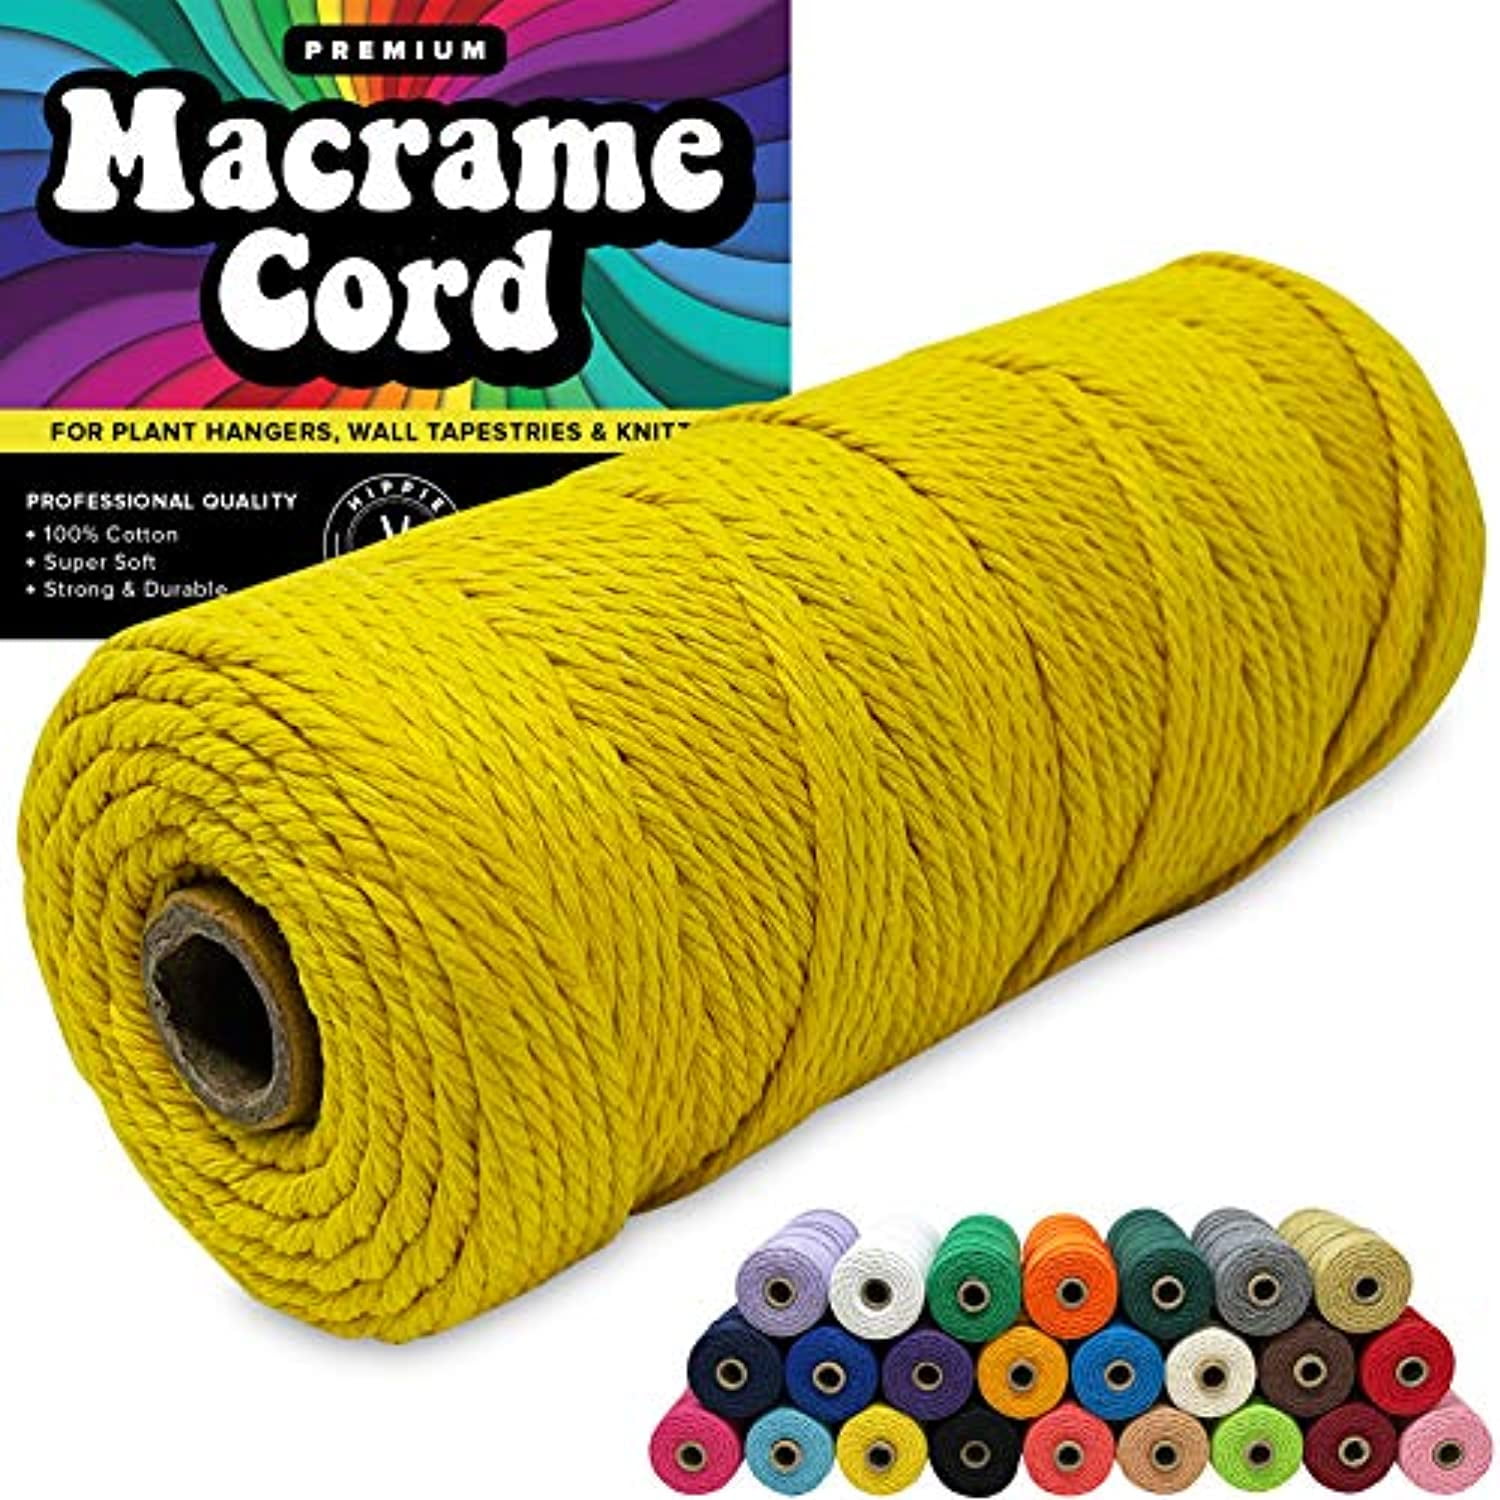 Macrame Cord 6mm x 175yd | 100% Natual Cotton Macrame Rope | 3 Strand  Twisted Cotton Cord for Handmade Plant Hanger Wall Hanging Craft Making,  Black